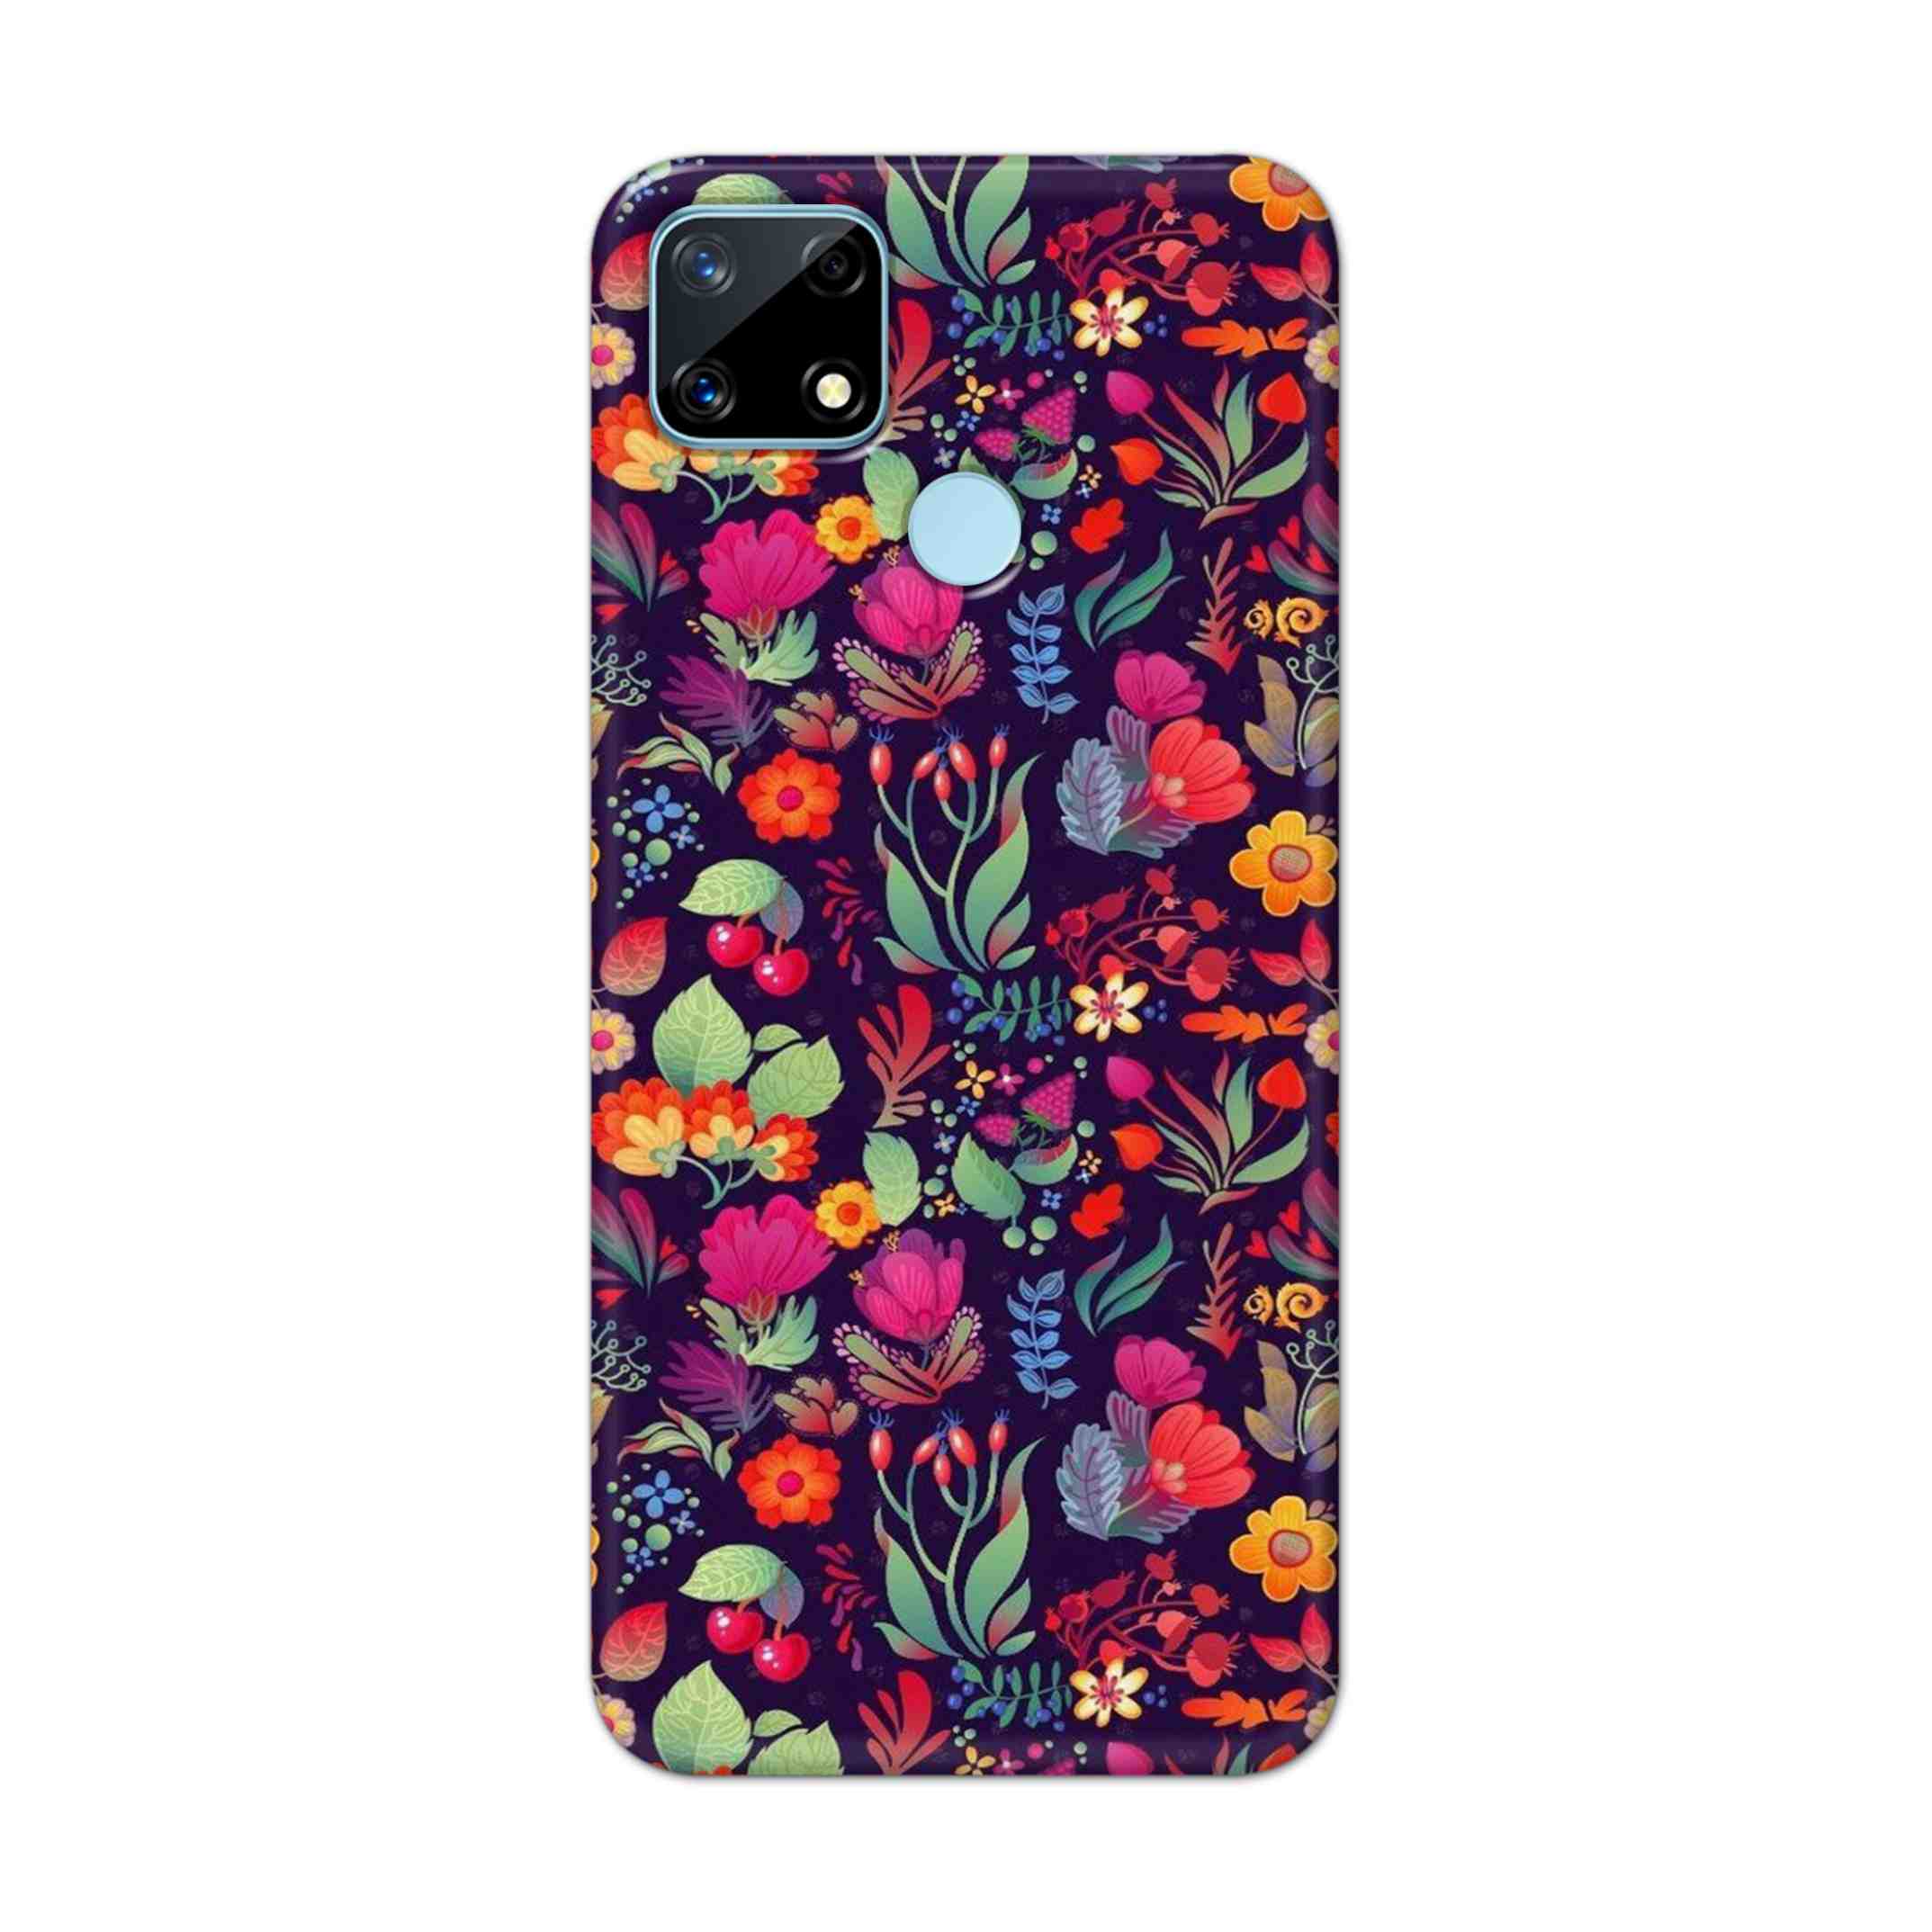 Buy Fruits Flower Hard Back Mobile Phone Case Cover For Realme Narzo 20 Online